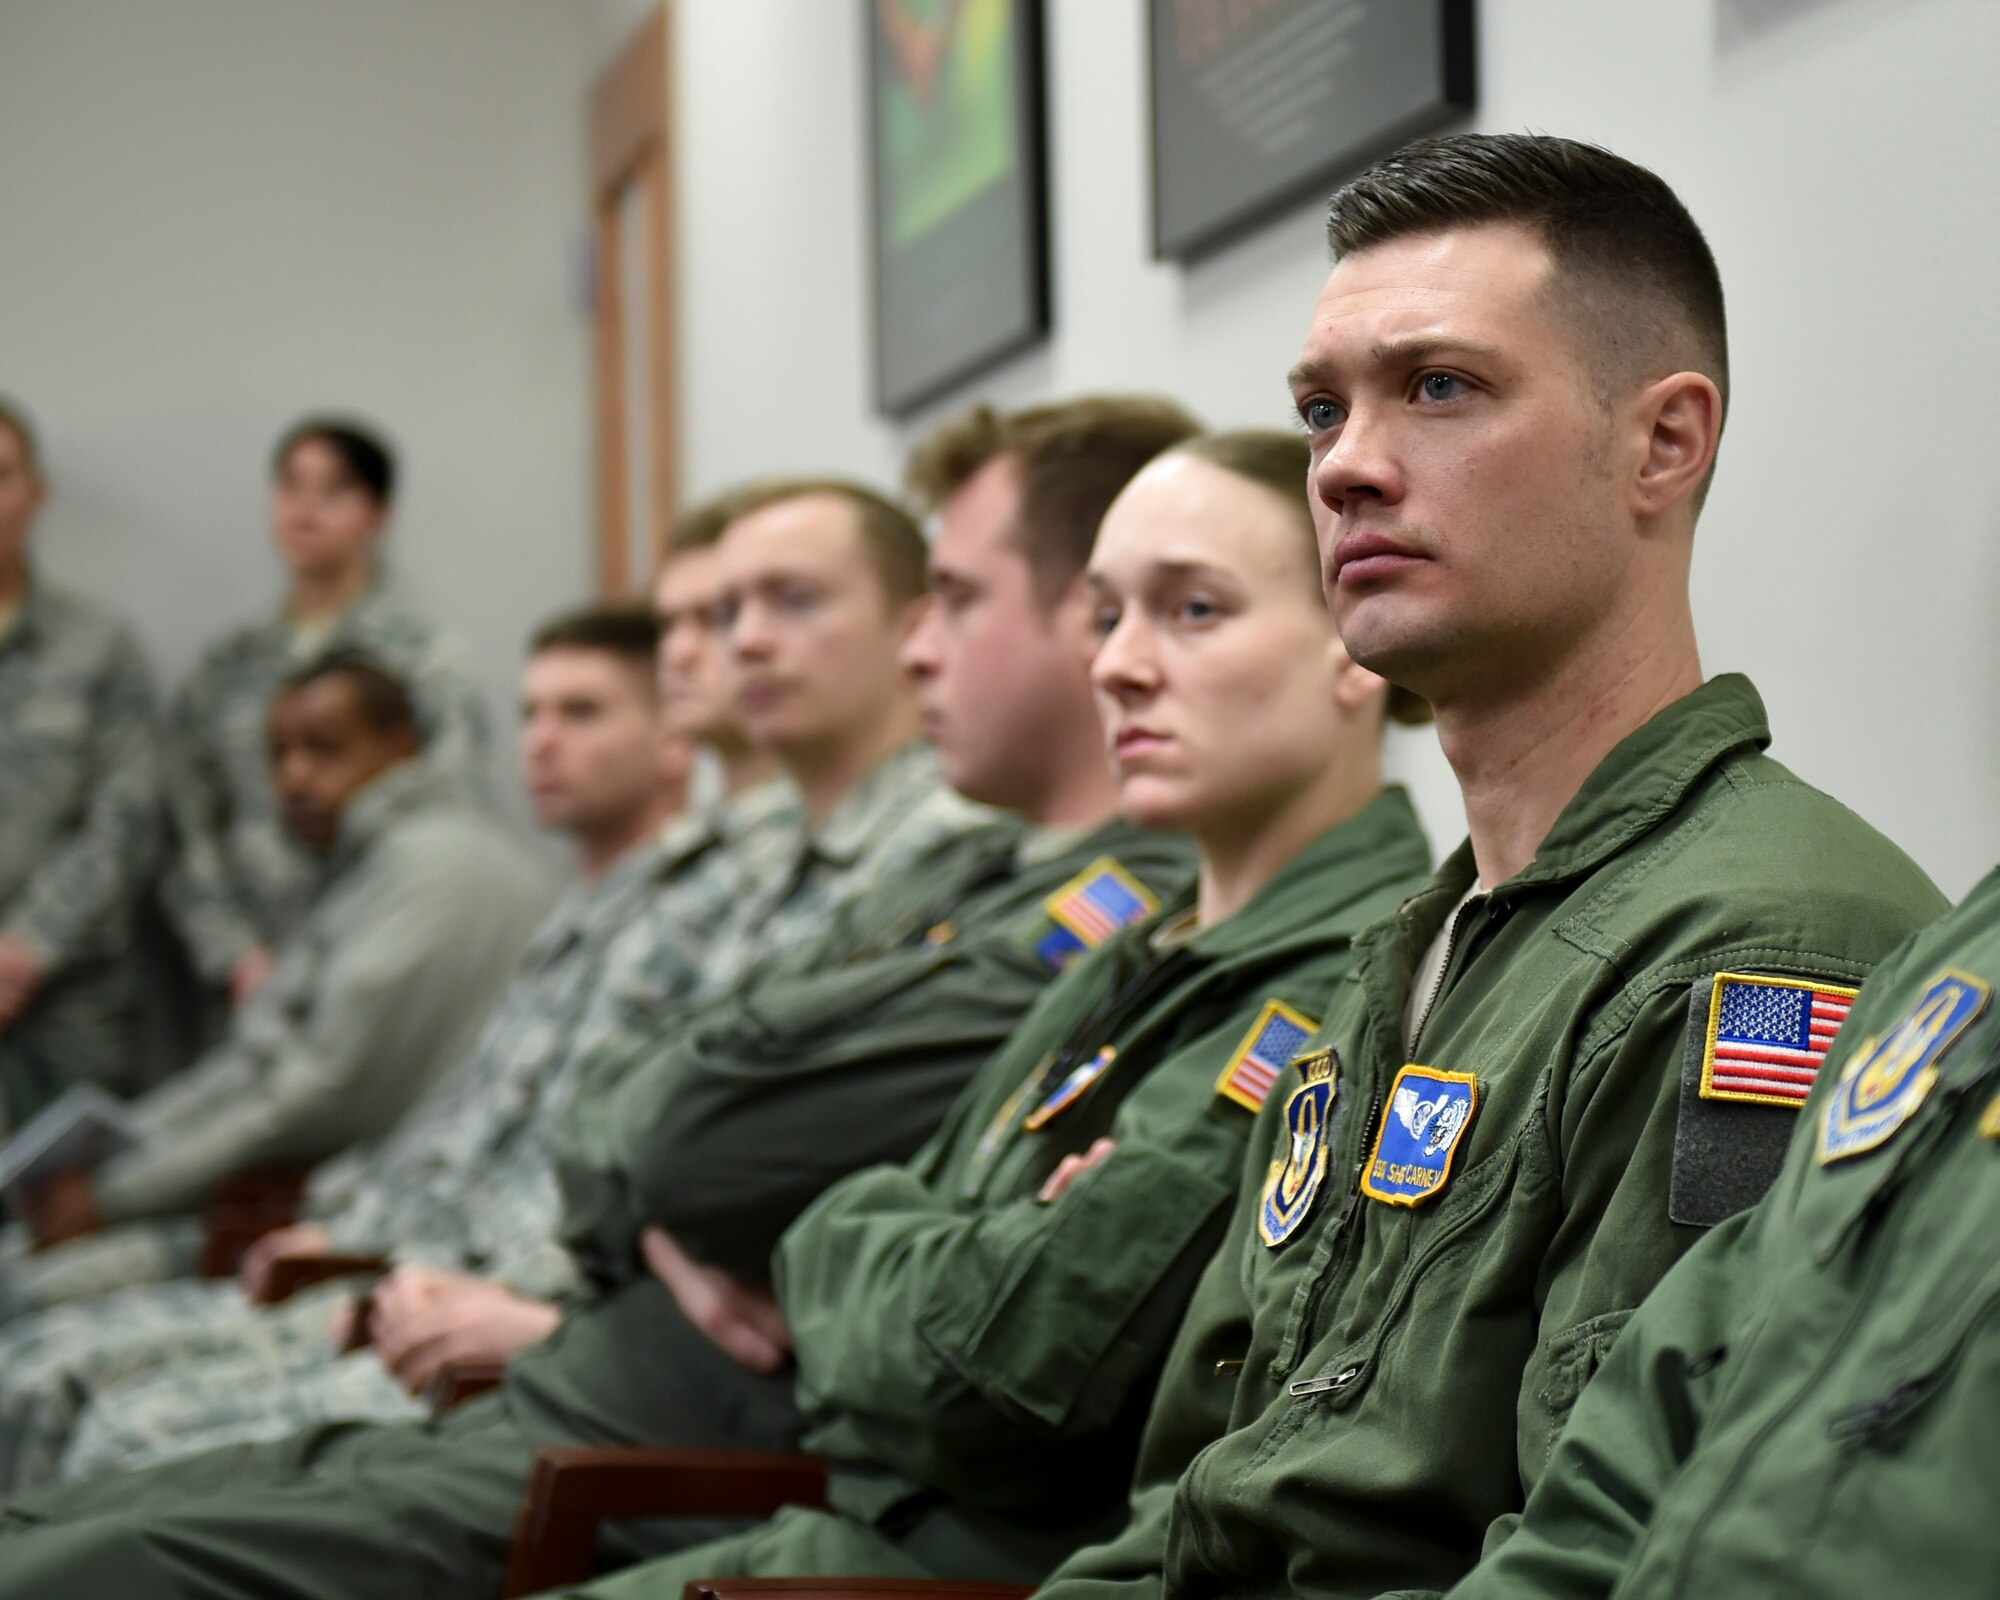 Chief Master Sgt. Imelda B. Johnson, the 22nd Air Force Command Chief Master Sergeant, visited Youngstown Air Reserve Station, February 9th, 2019. During her stay, Johnson met with more than 35 Air Force Reserve non-commissioned officers.
	During the meet-and-greet, Johnson opened the floor to the Airmen so they may voice their questions, concerns and experiences within the current Air Force Reserve structure. A myriad topics were discussed: the optimization of training, commissioning opportunities, Airmen retention, ramifications of a possible government shutdown and benefits concerning retirement and higher education. Johnson said that the purpose of the event was to pass on knowledge and to get people to start thinking outside the box and sharing their expertise.